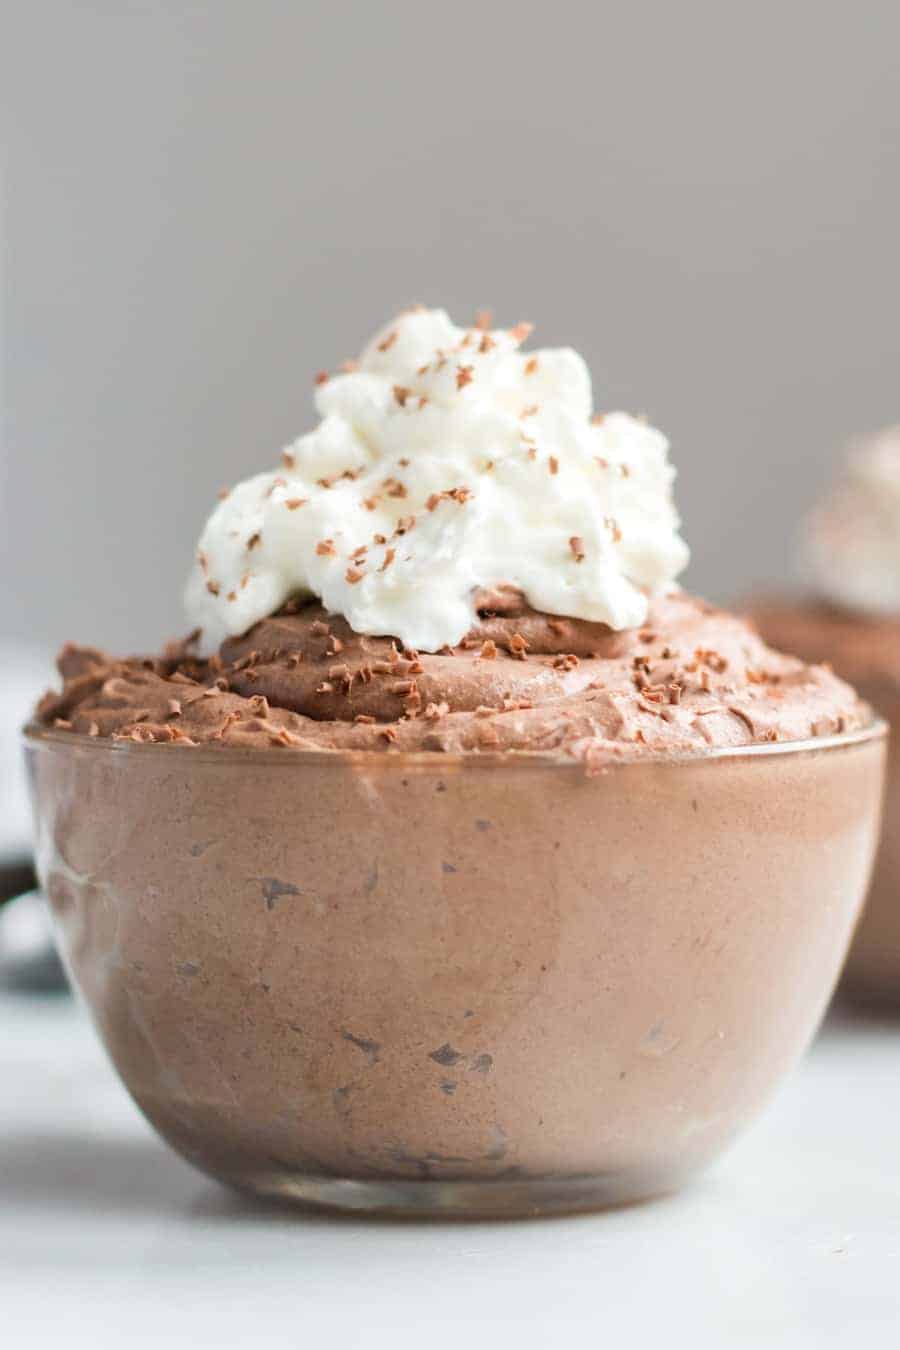 Small glass bowl filled with chocolate mousse and topped with whipped cream and chocolate shavings.